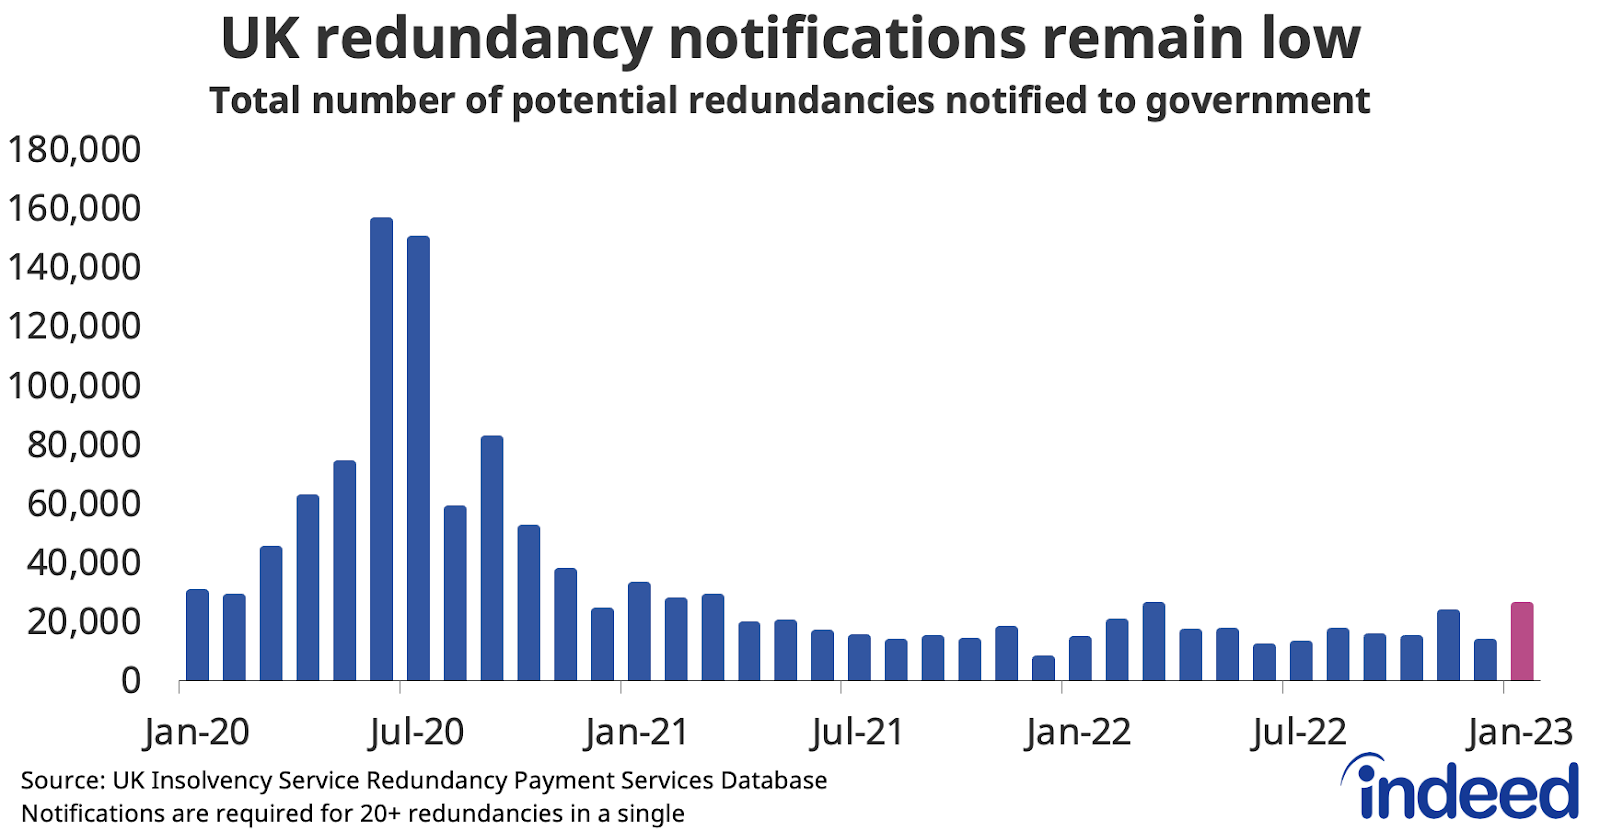 Bar chart titled “UK redundancy notifications remain low” showing the number of potential redundancies notified to the government between January 2020 and January 2023. Redundancy notifications rose in January 2023 but remained low. 